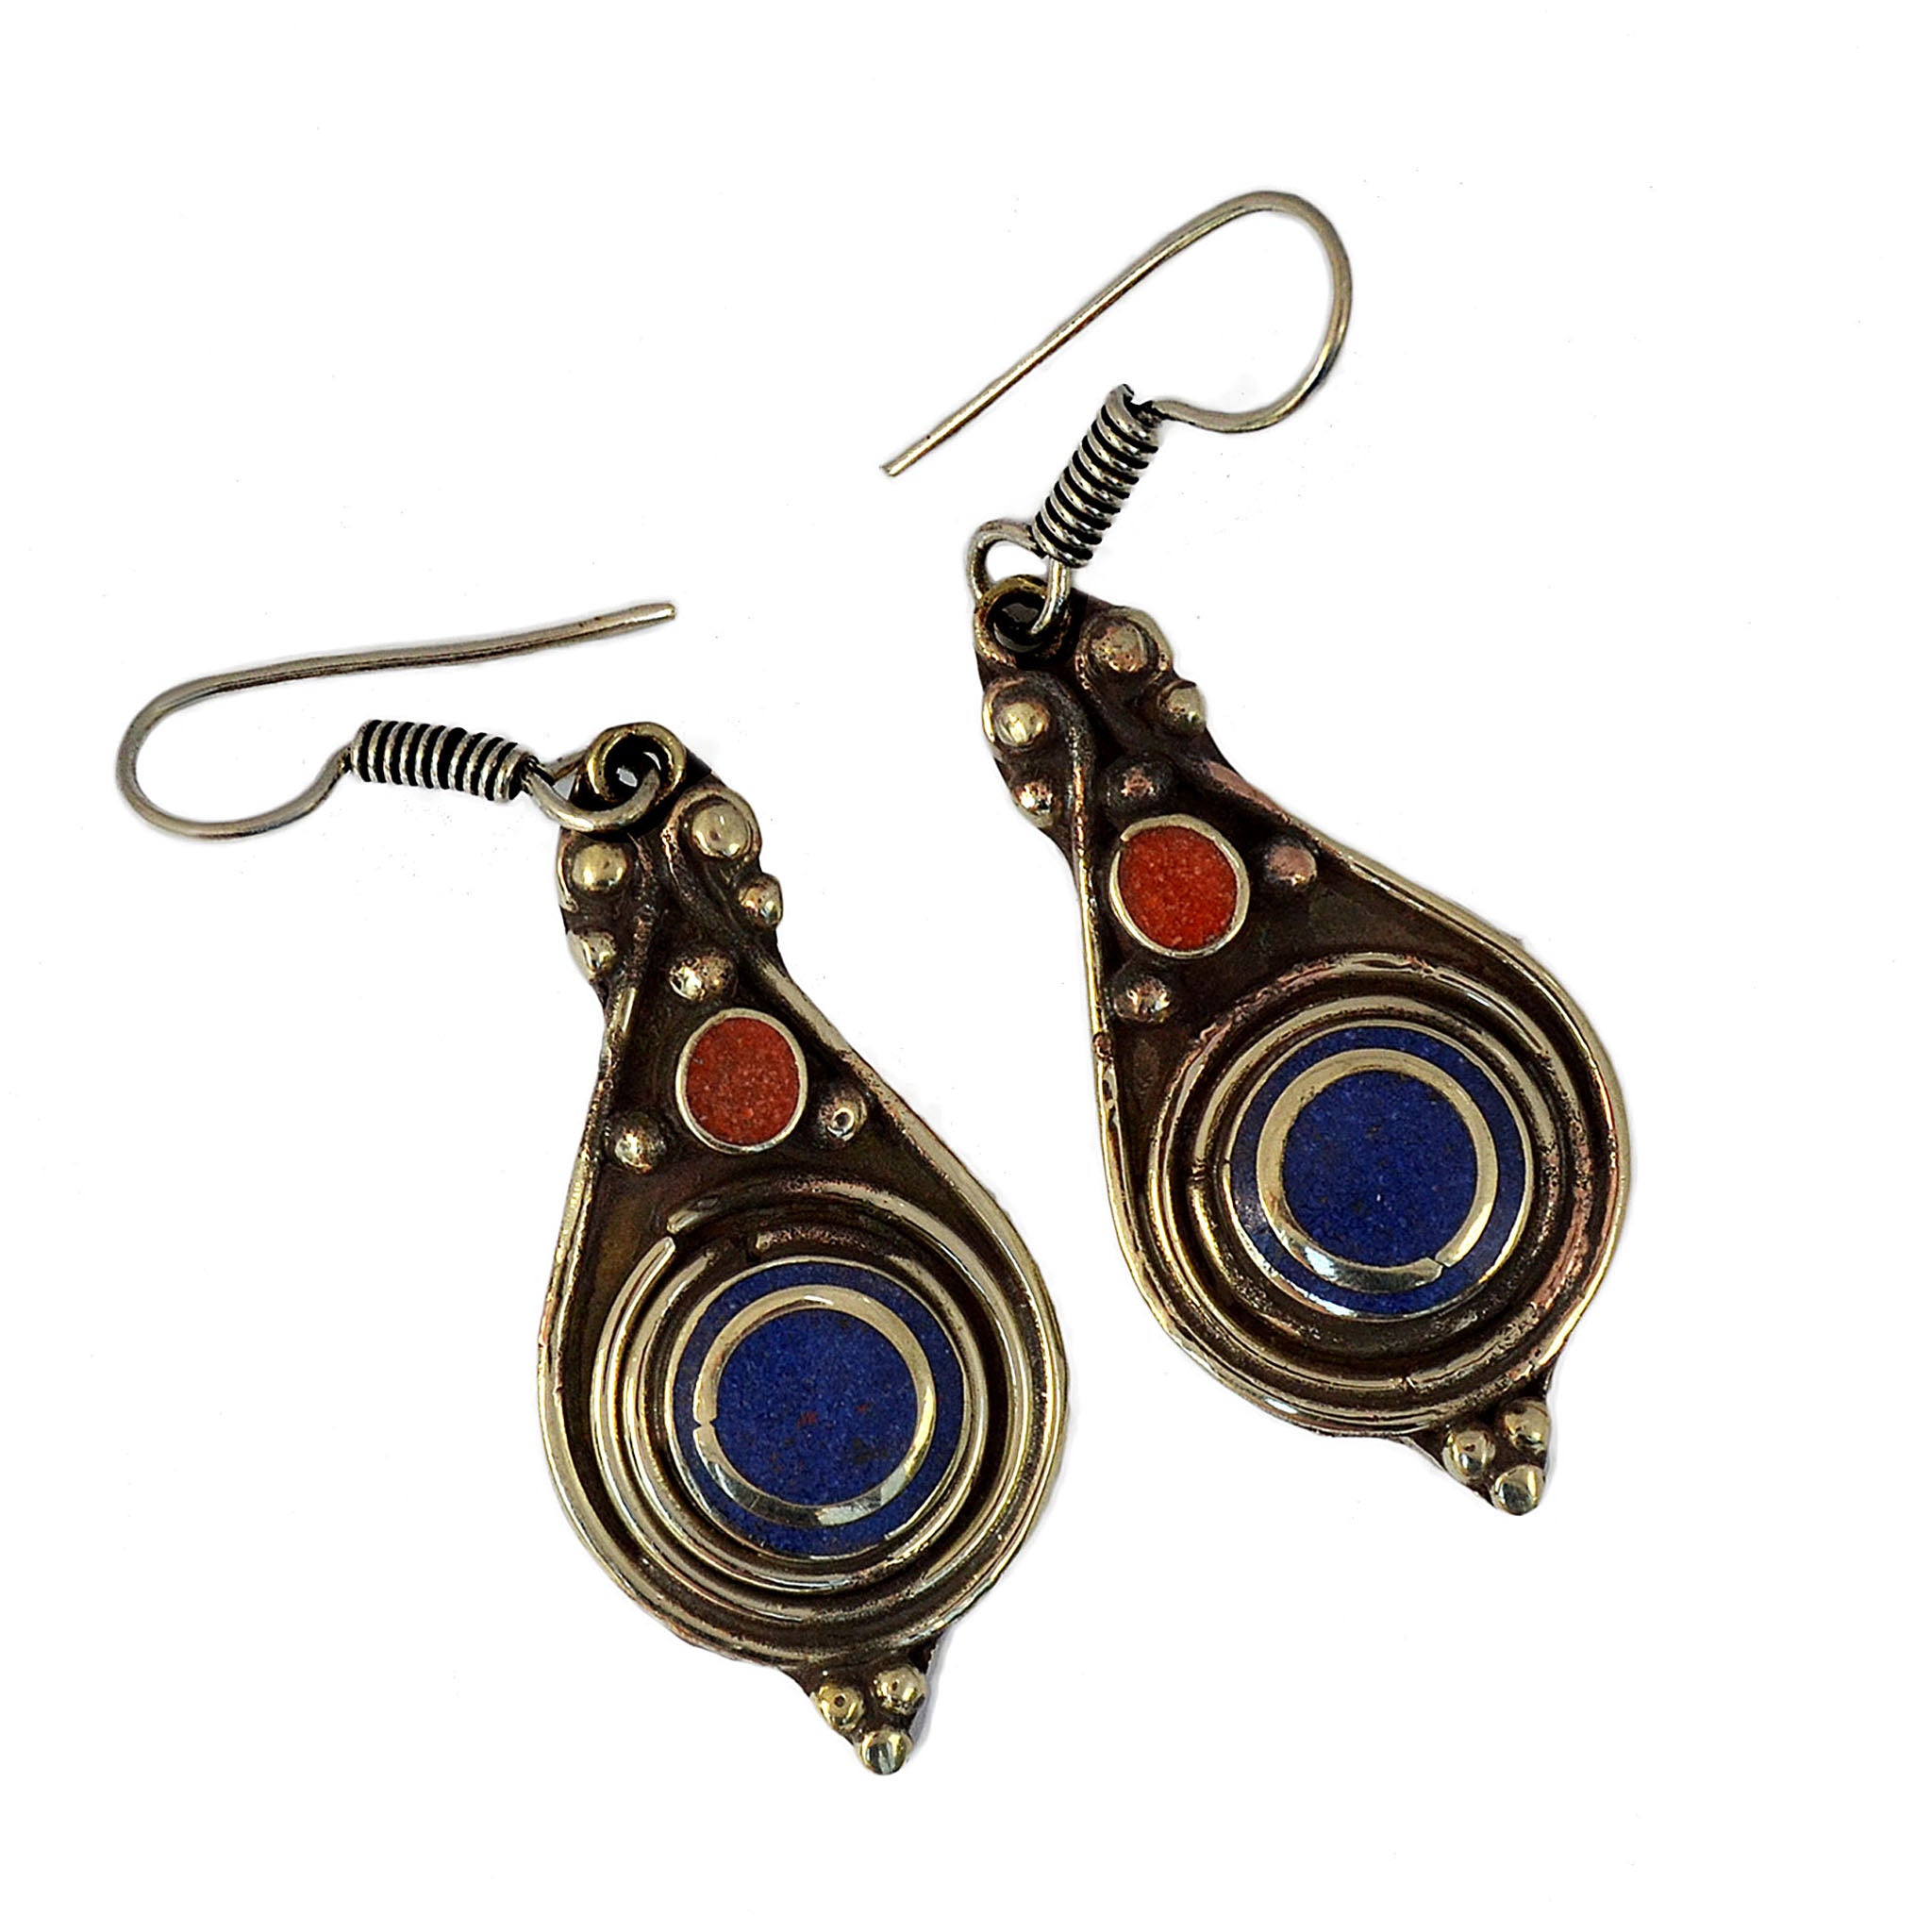 Tribal tibetan drop silver earrings with inlay lapis lazuli and red coral stones